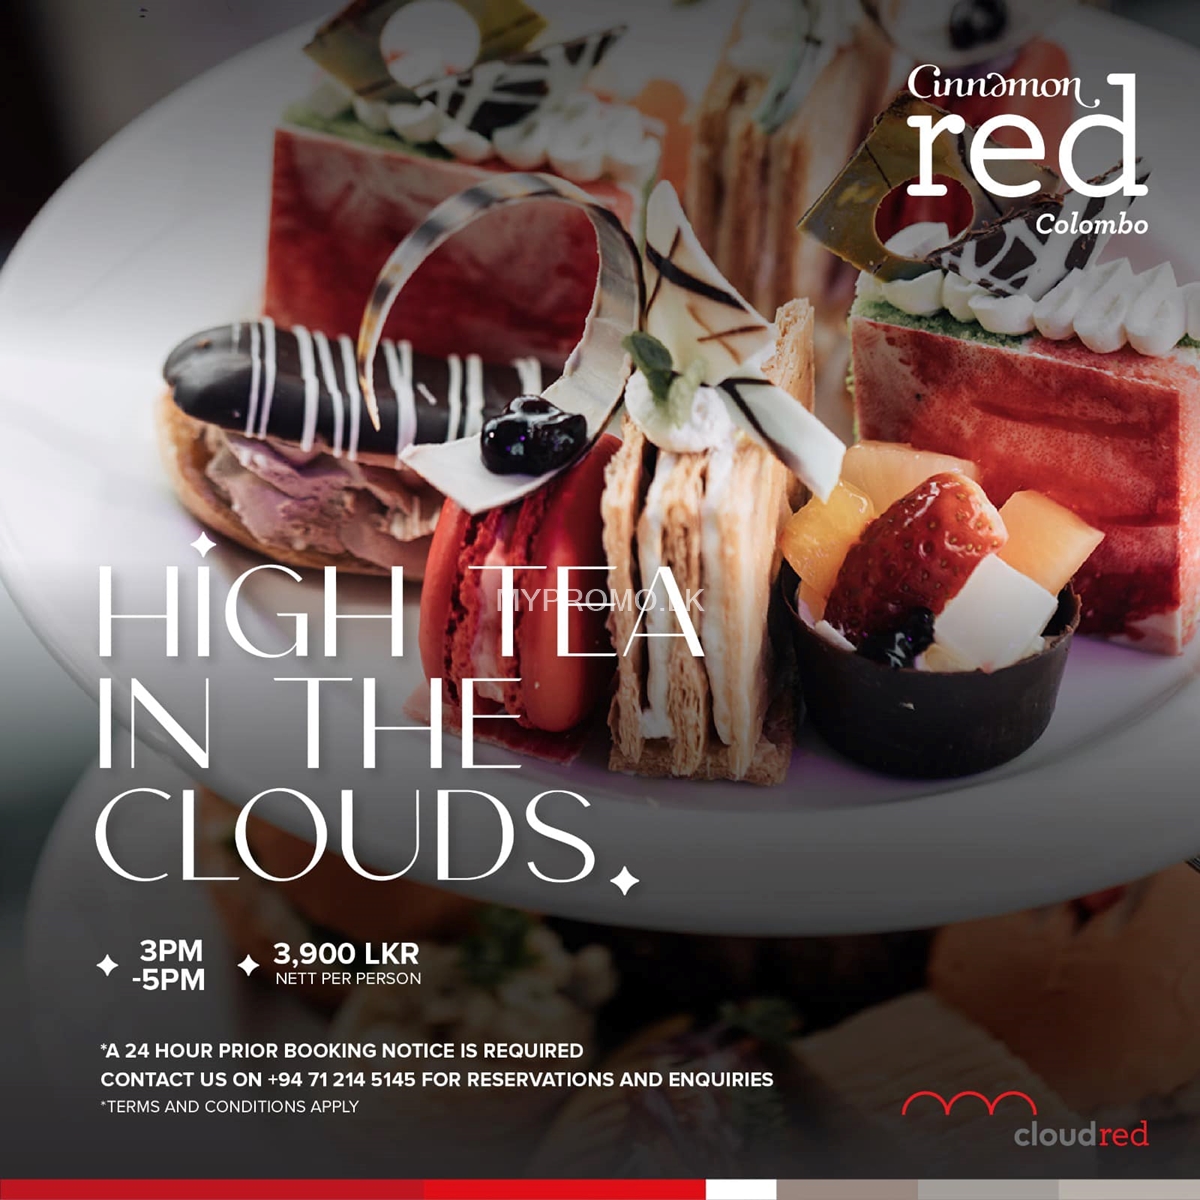 HIgh tea in the clouds at Cinnamon Red